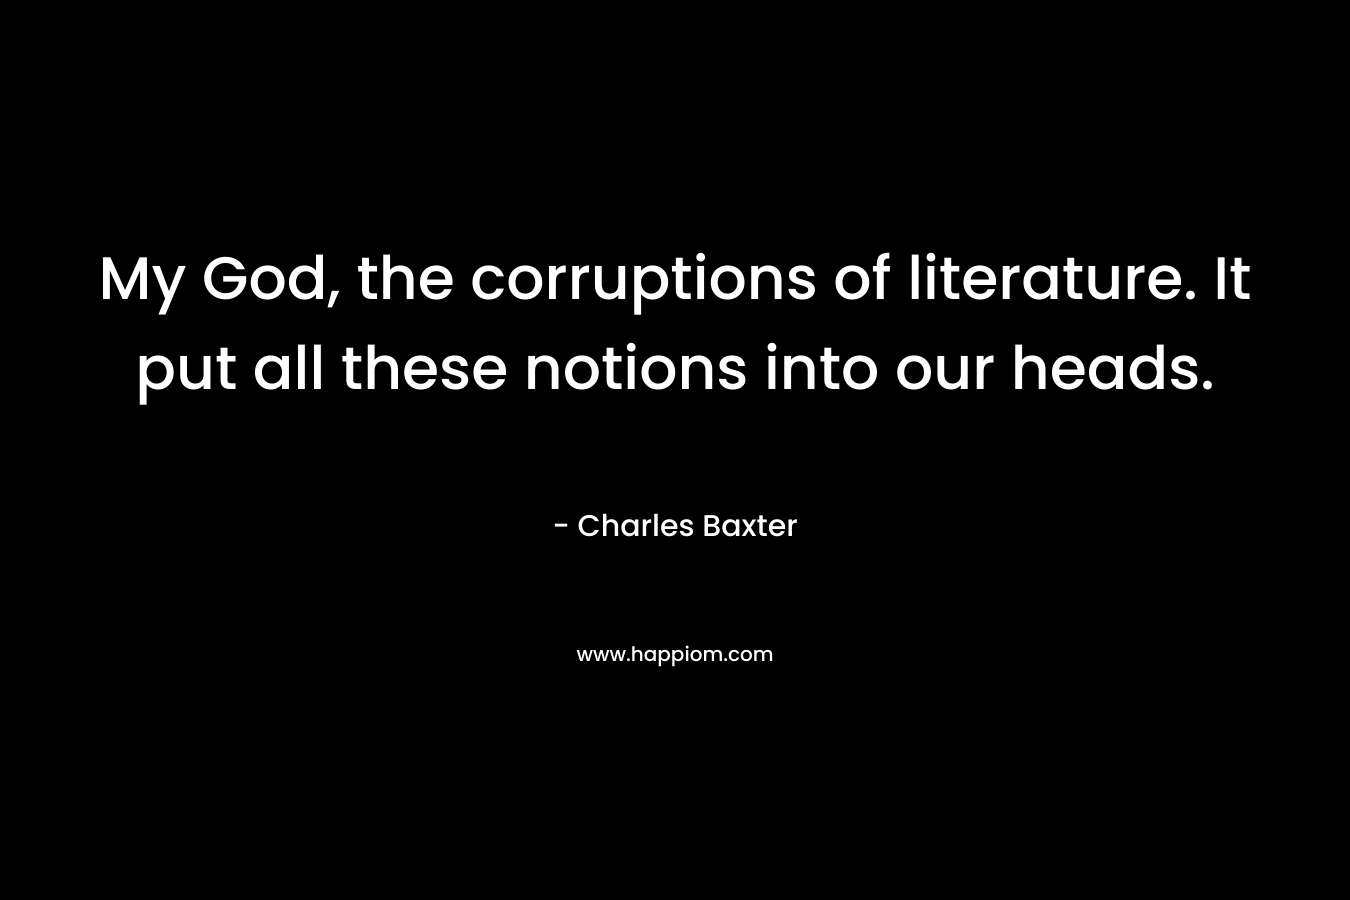 My God, the corruptions of literature. It put all these notions into our heads. – Charles Baxter